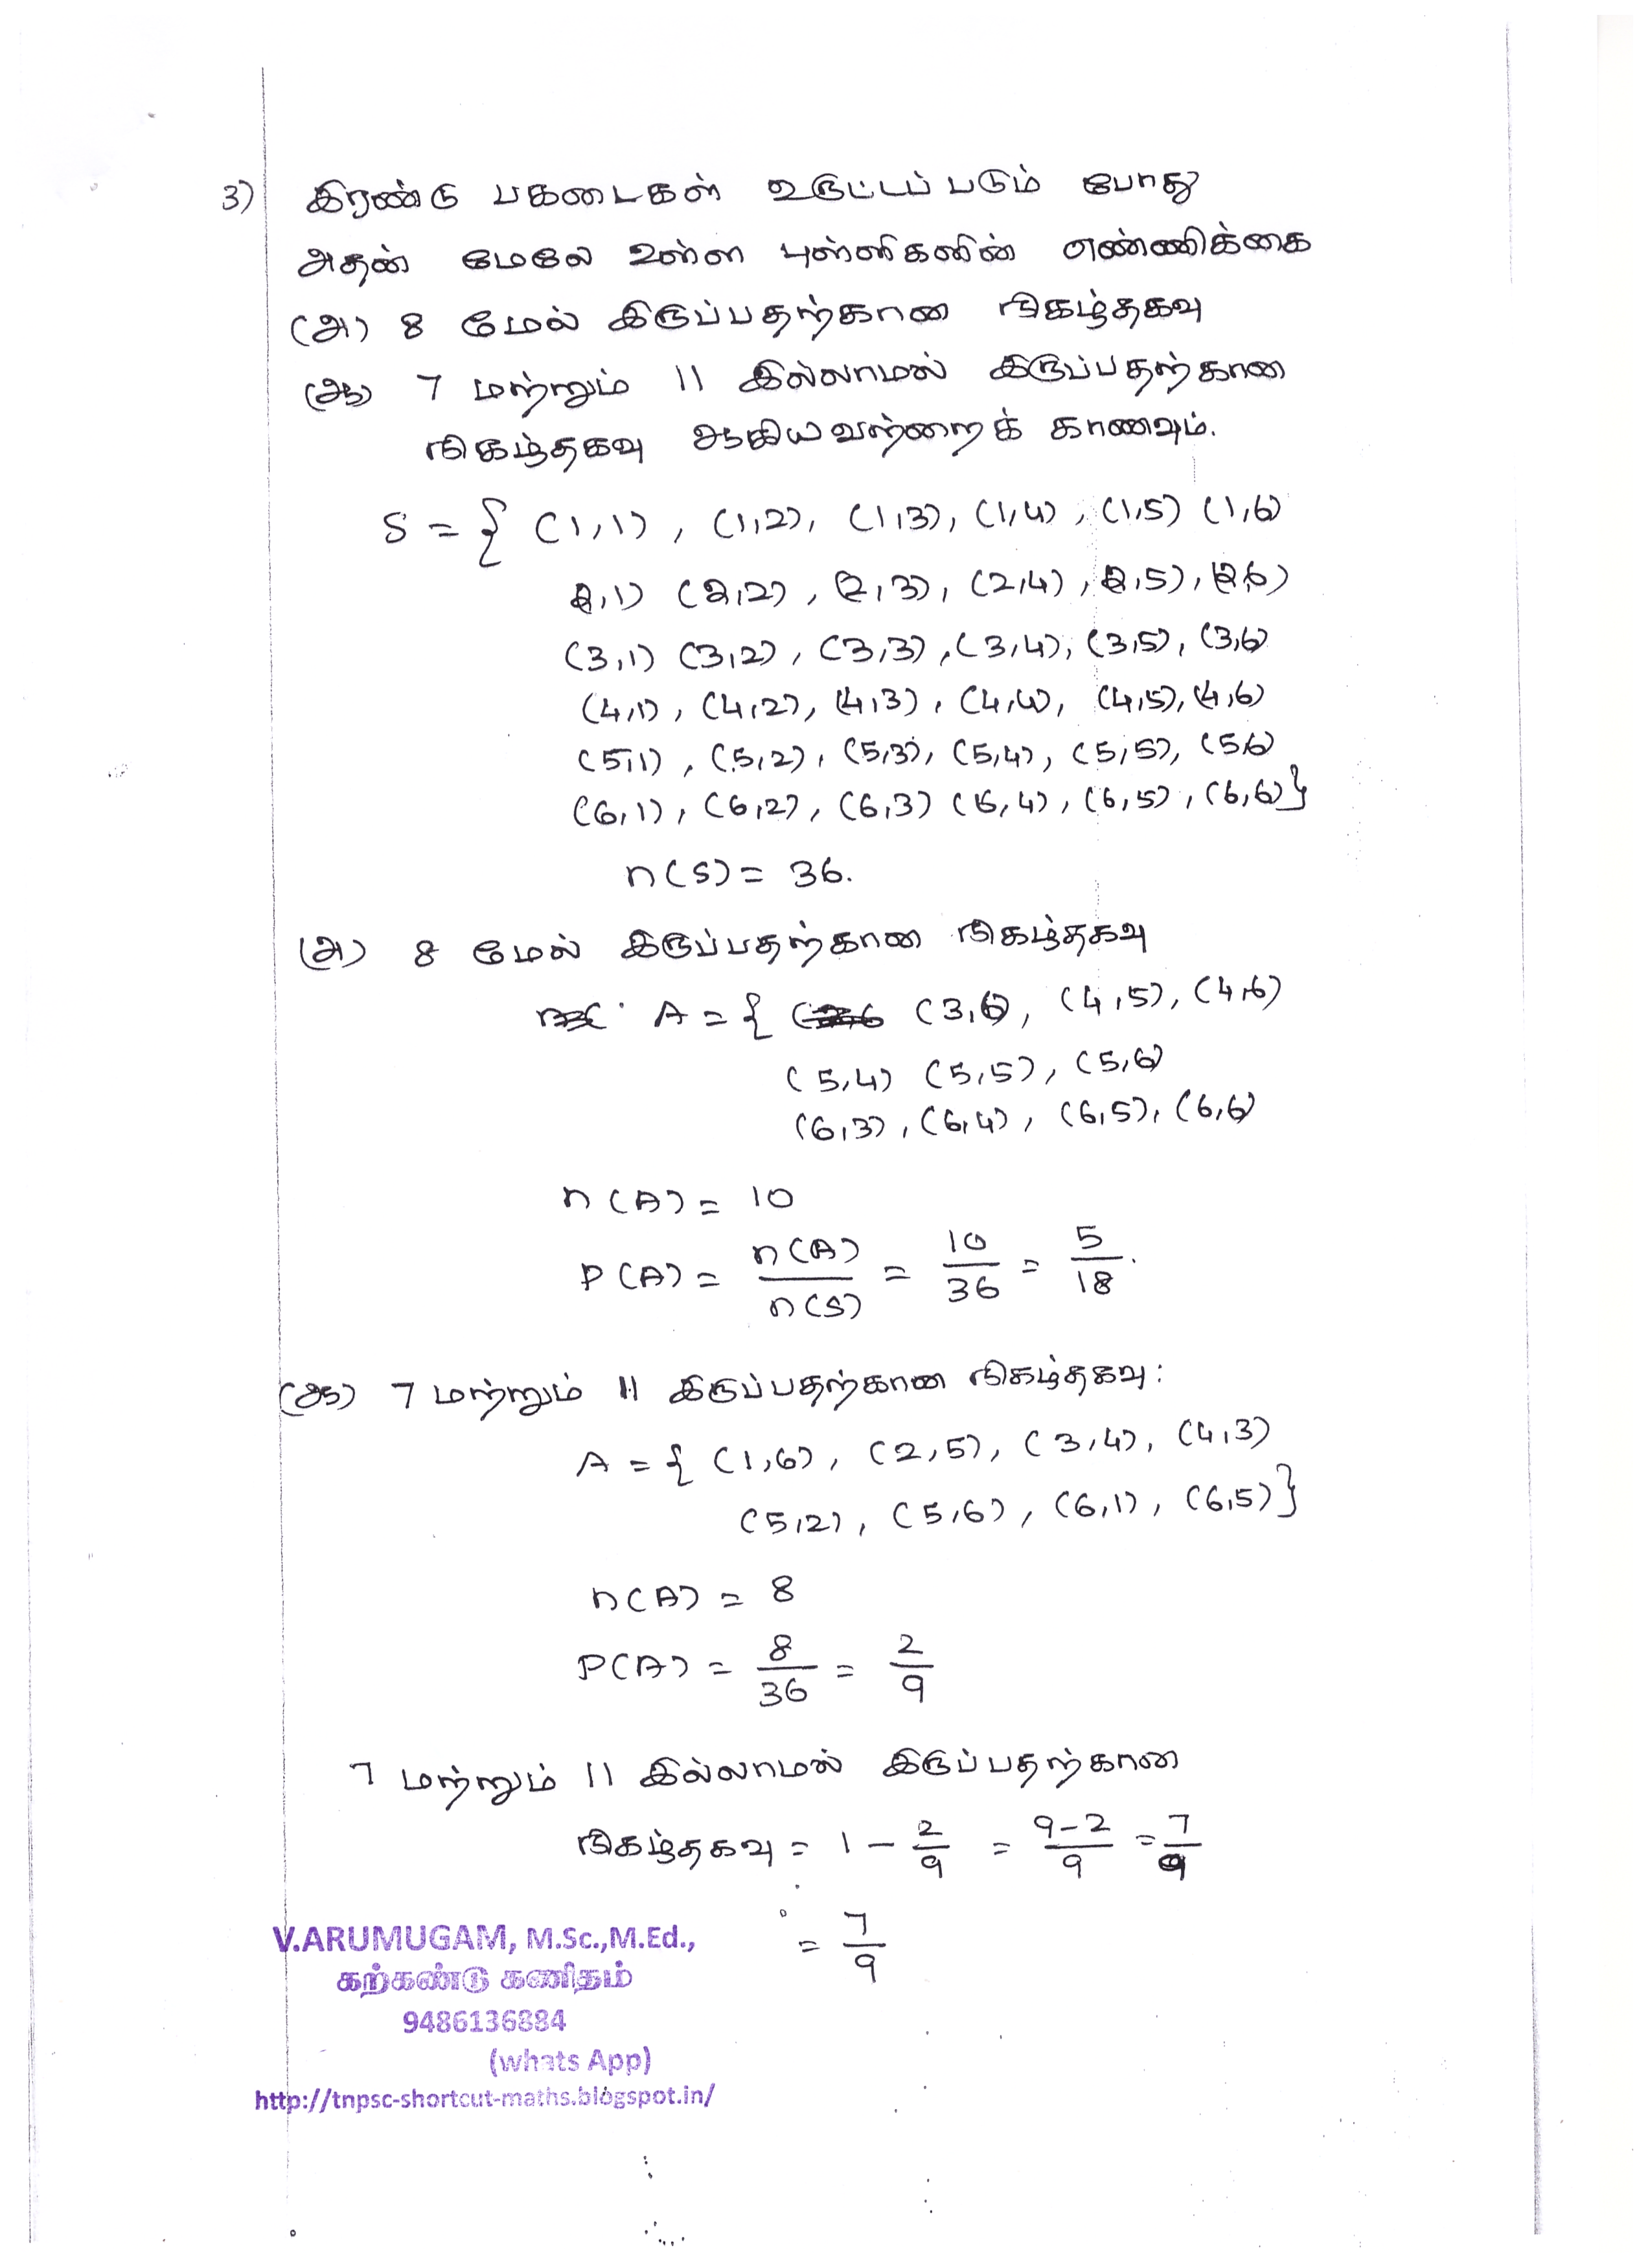 tnpsc group 1 mains previous year question paper